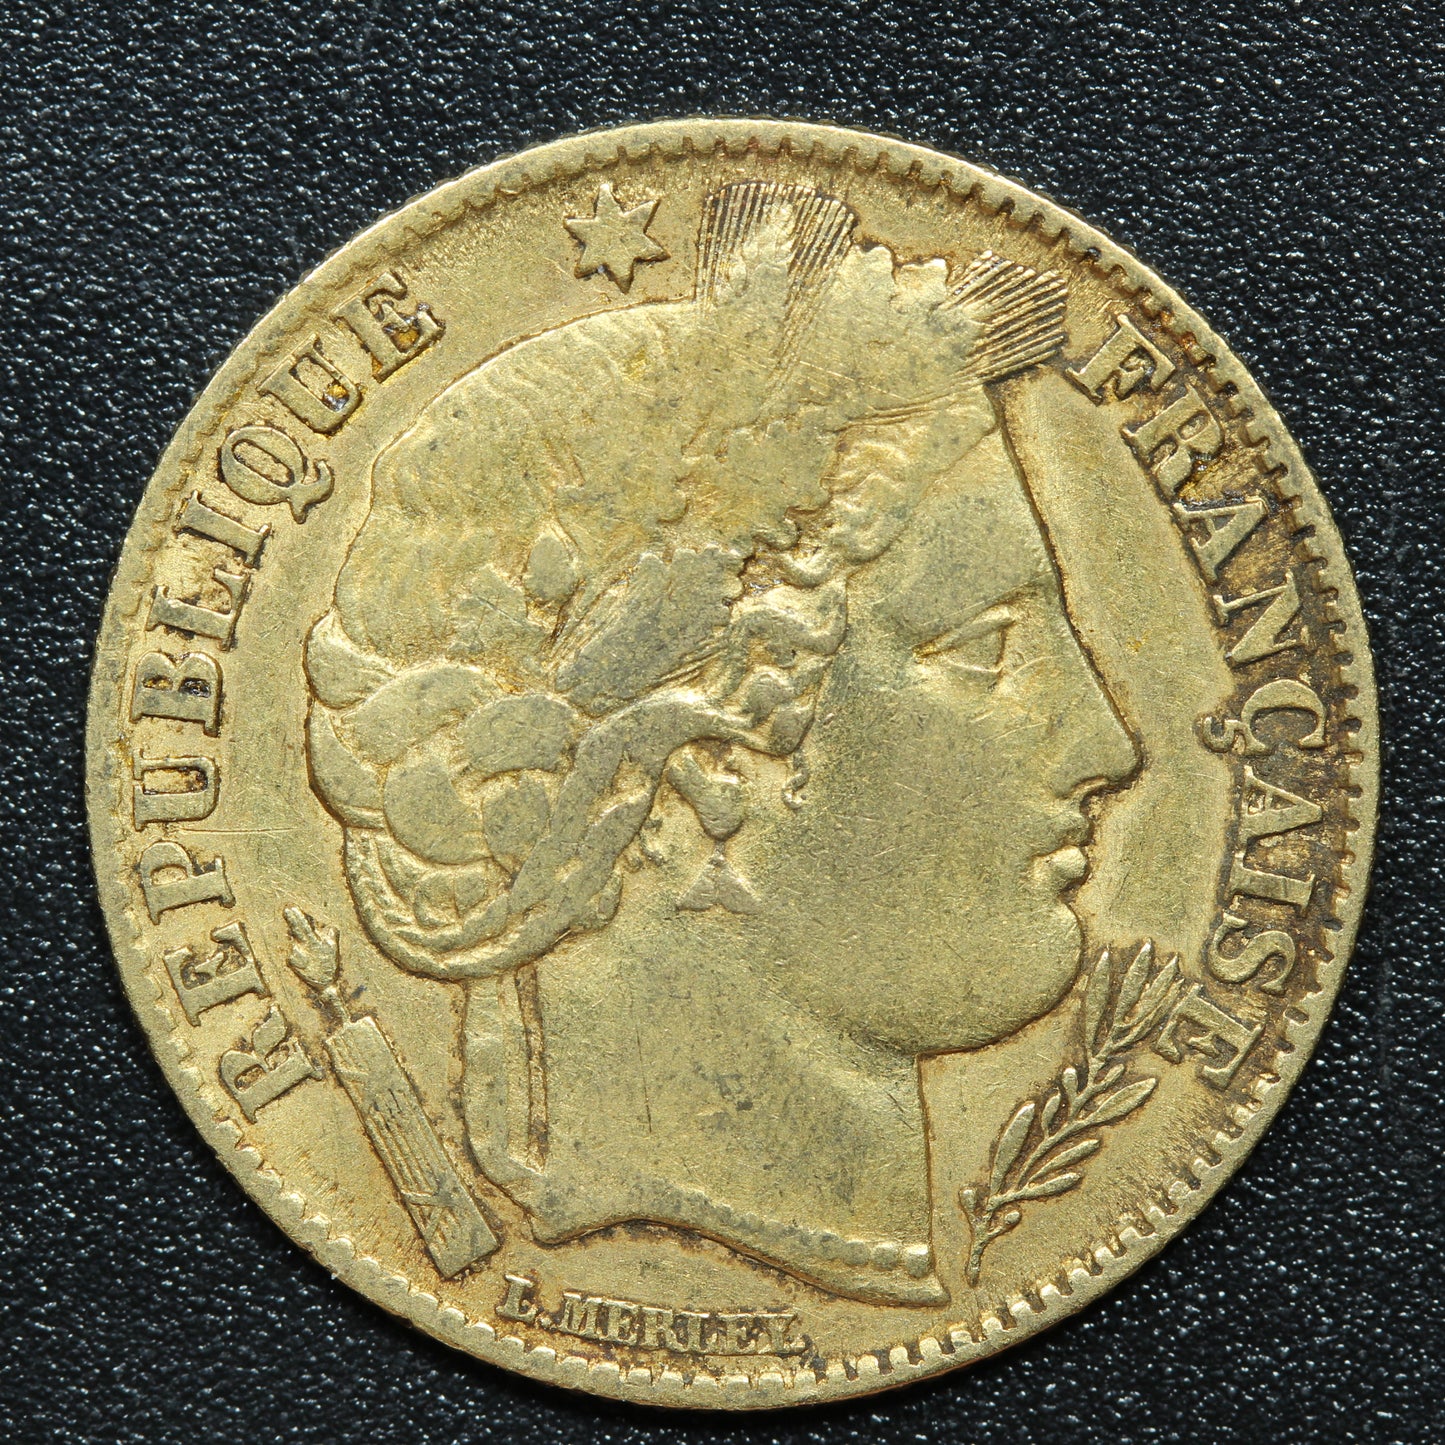 1851 A French Gold 10 Francs Liberty Head - KM#770